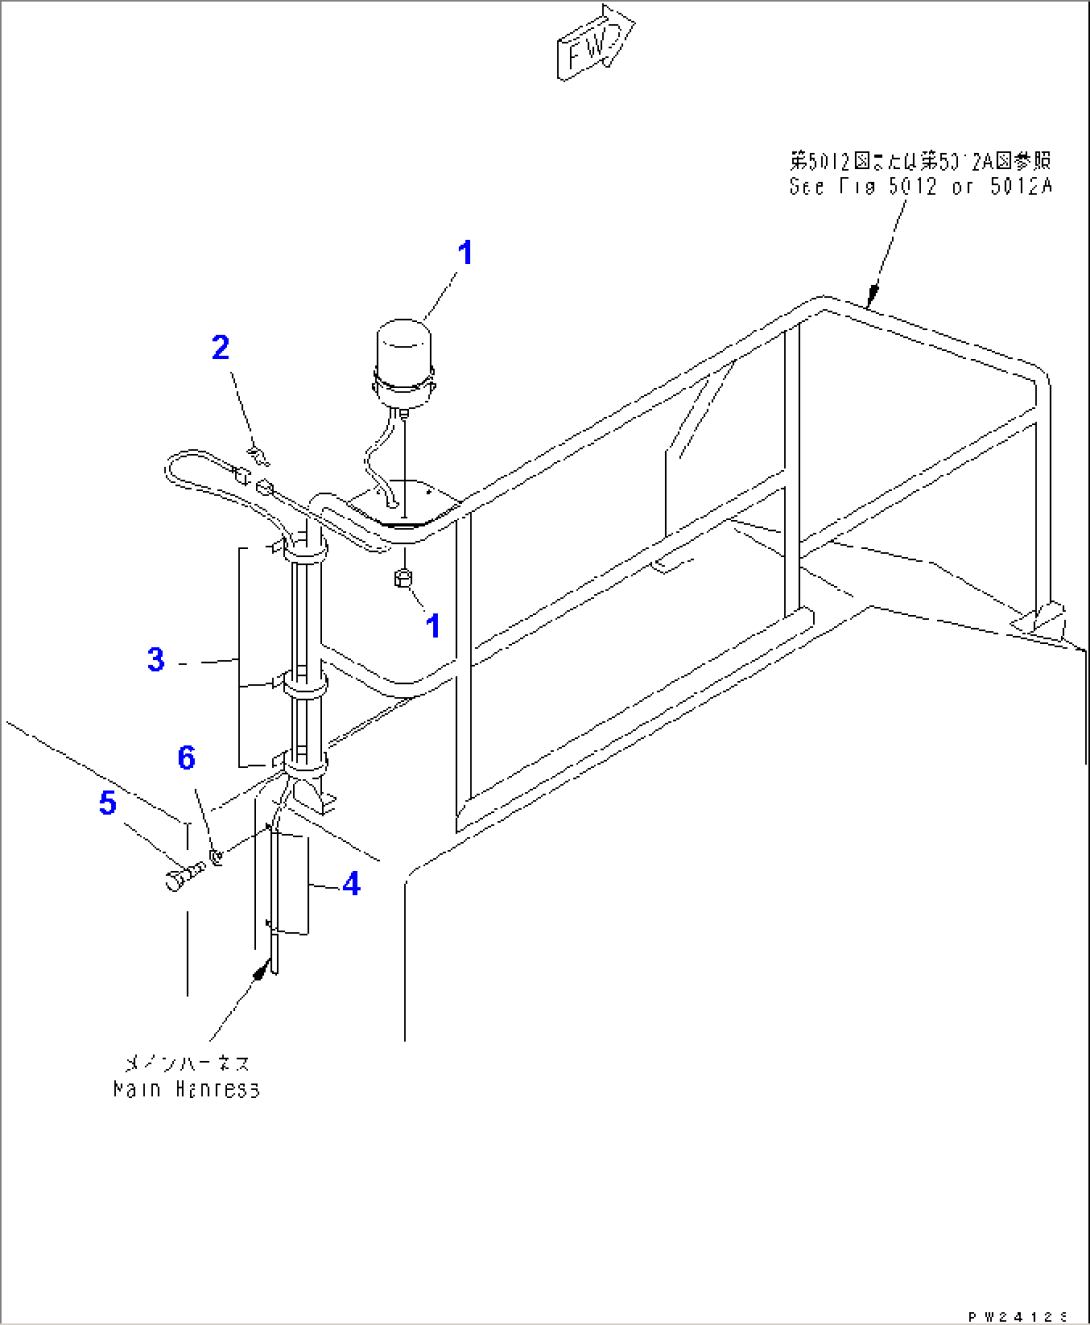 ELECTRICAL SYSTEM (3/9) (BEACON LAMP)